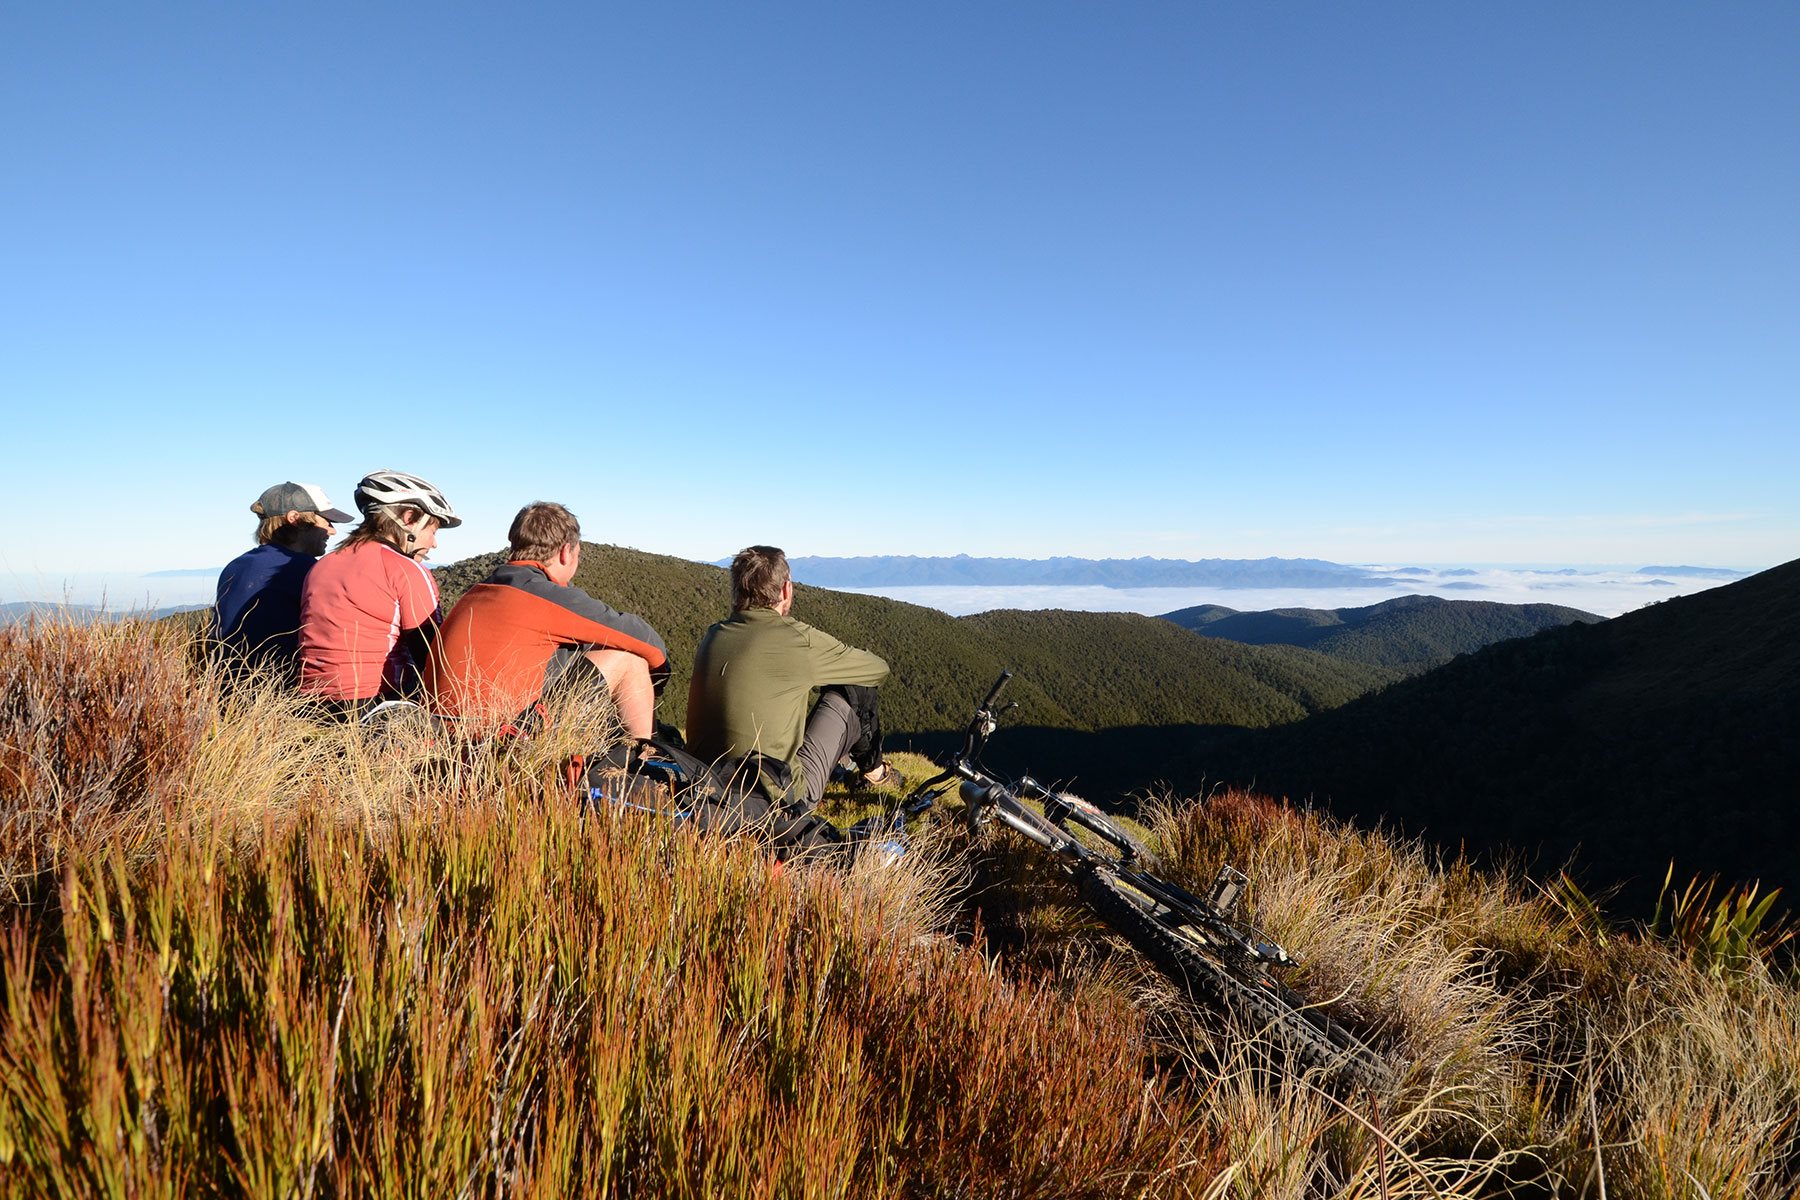 Explore the beautiful landscapes surrounding Reefton by cycle or bush walking.